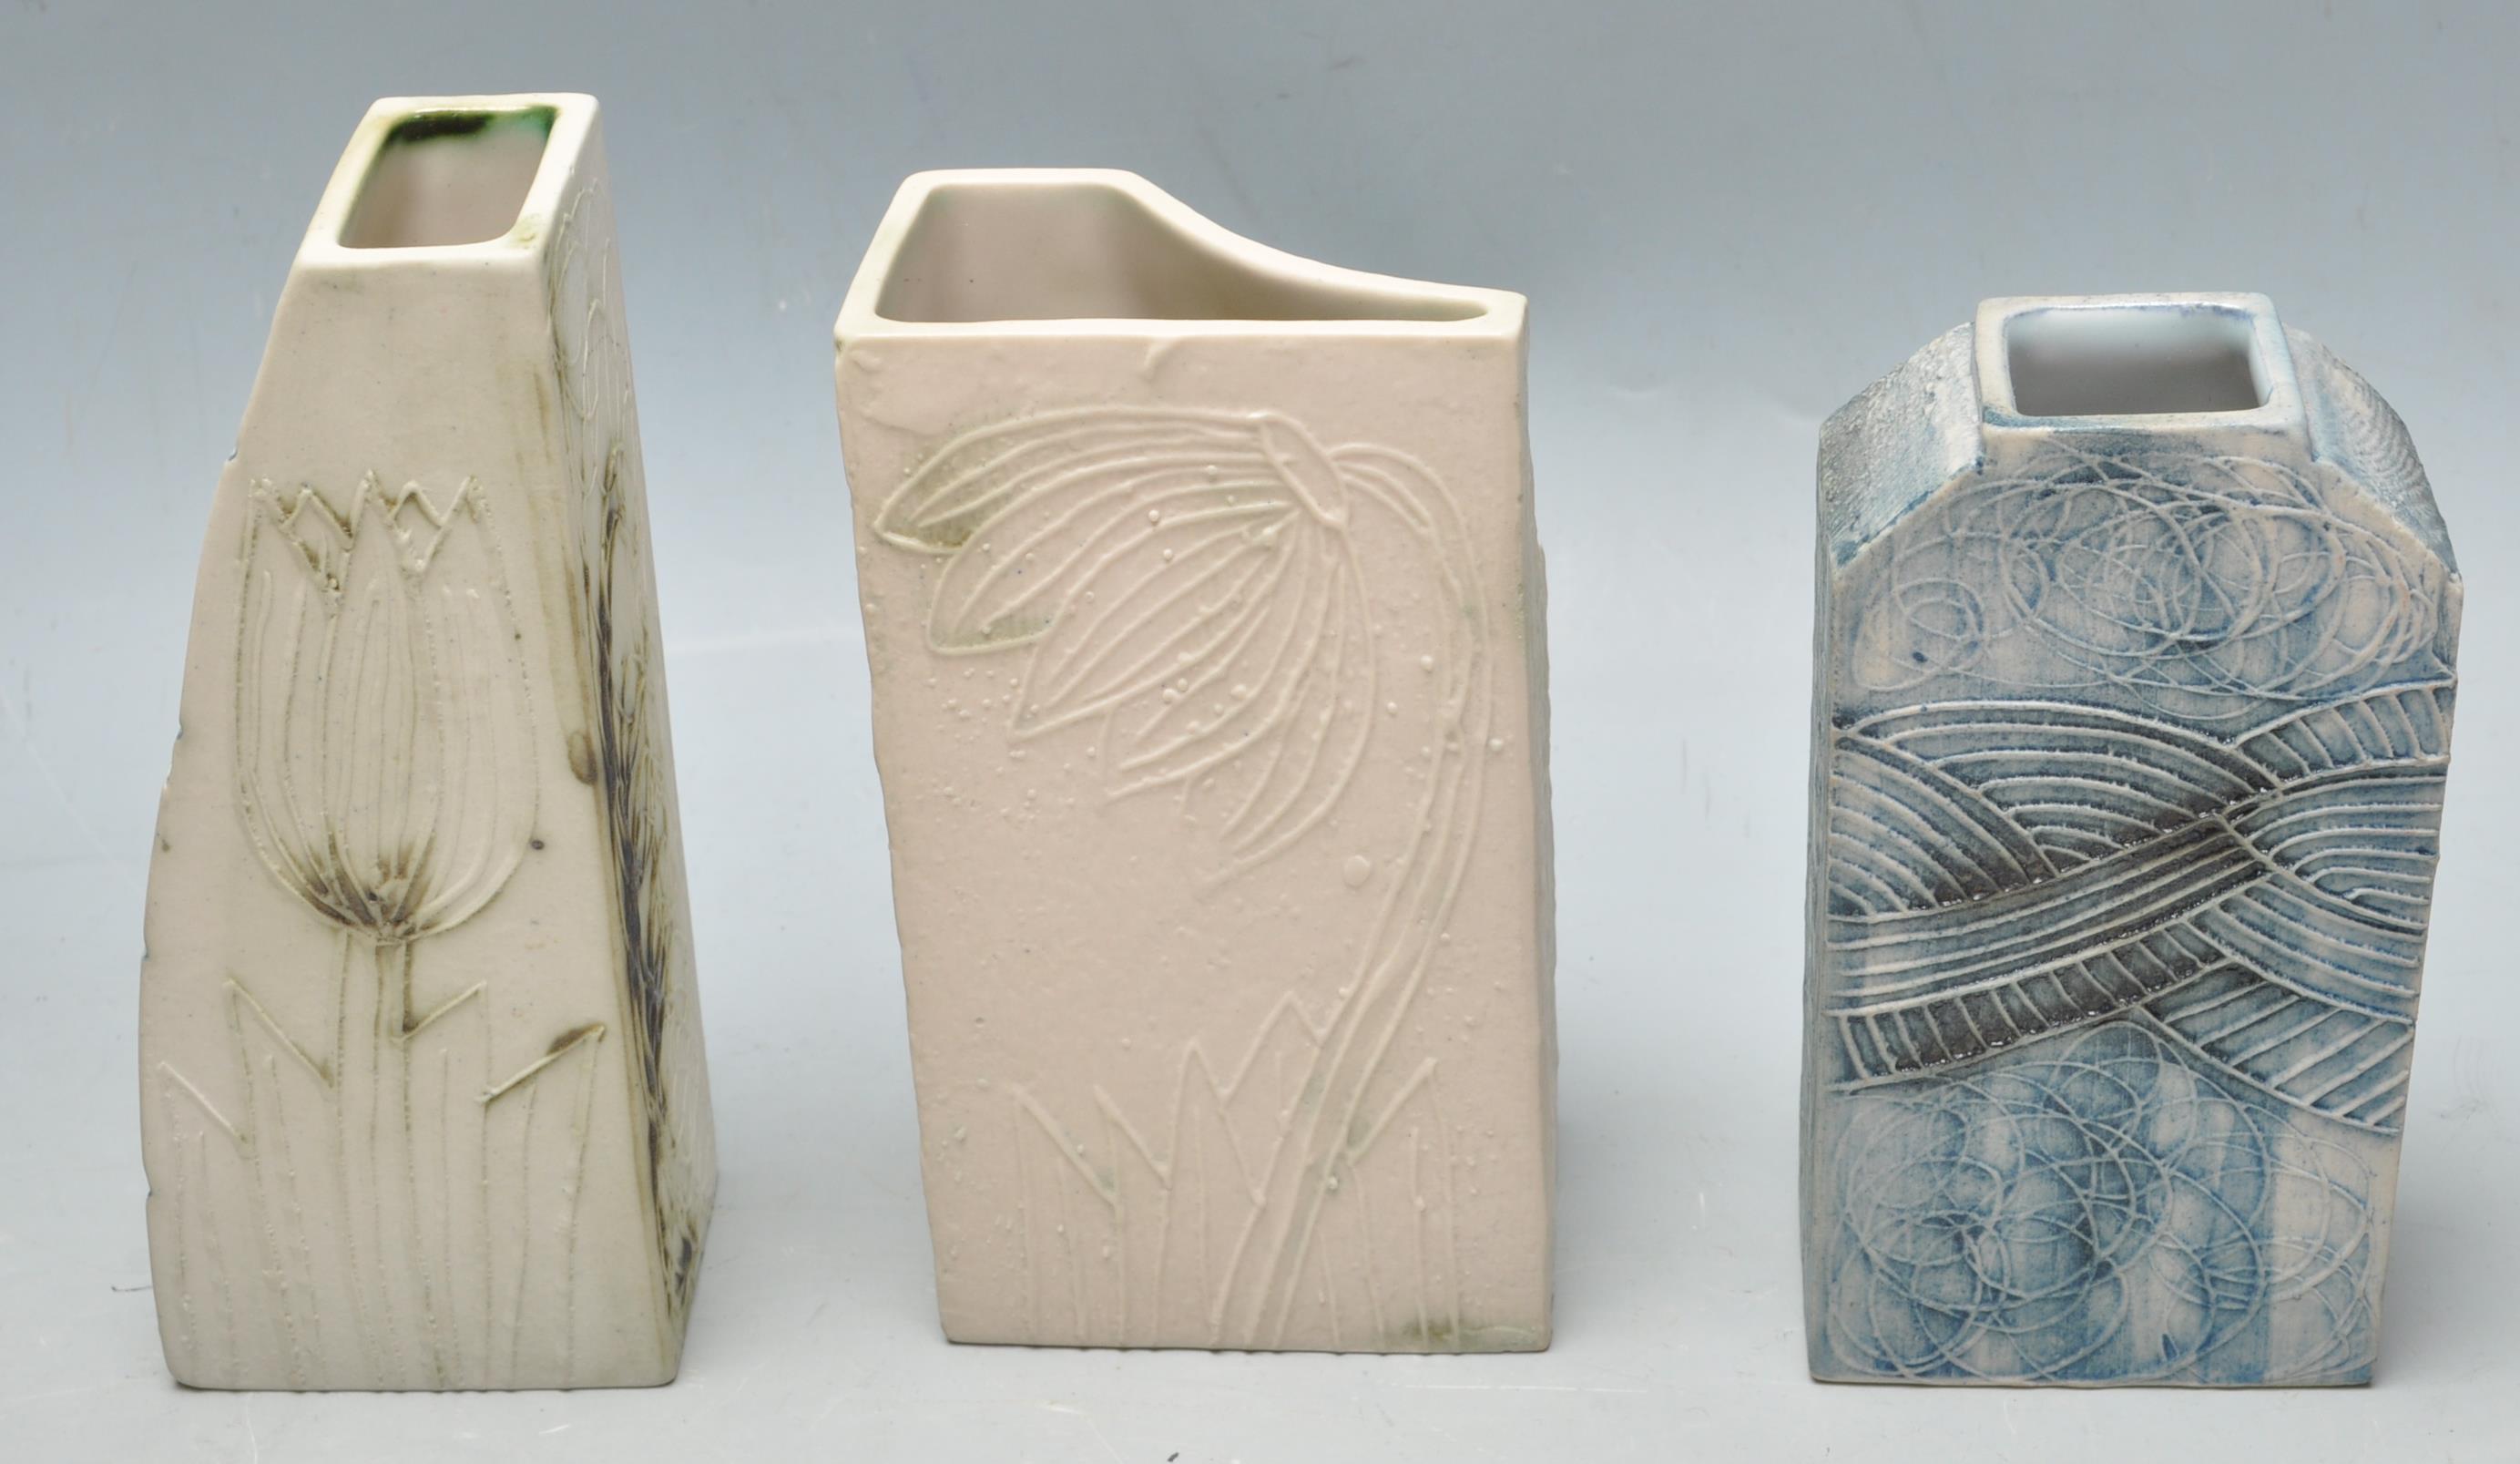 FOUR 20TH CENTURY CARN CORNWALL ART POTTERY VASES - Image 4 of 5